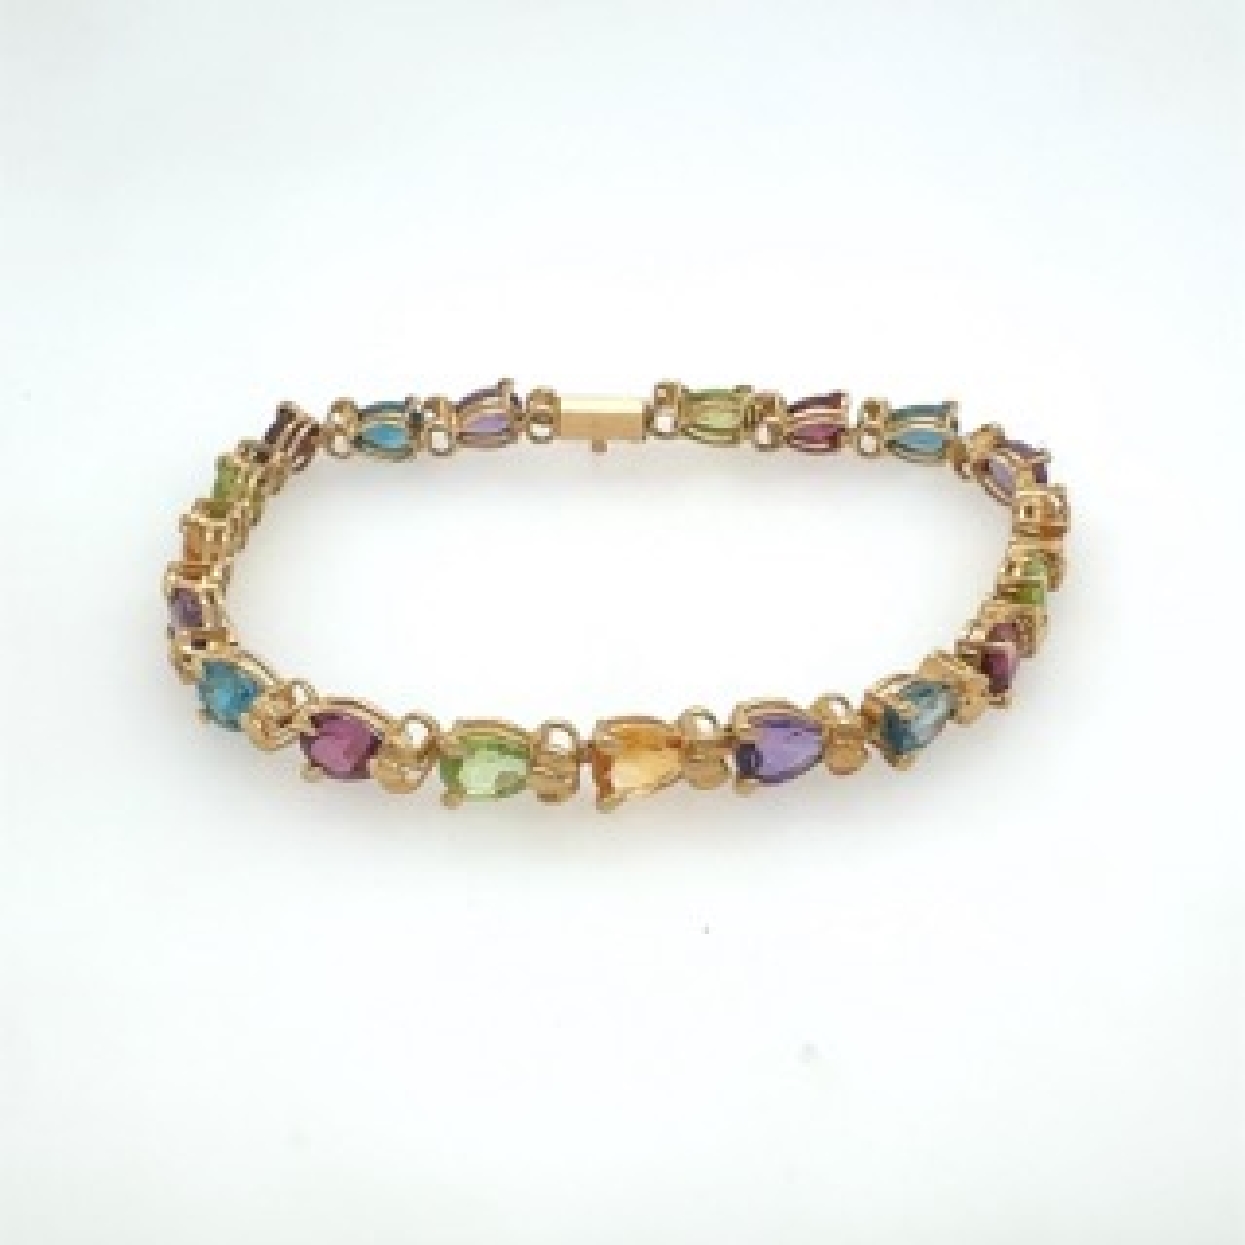 14K Yellow Gold Pear Gemstone Bracelet with Various Stones

8 Inches